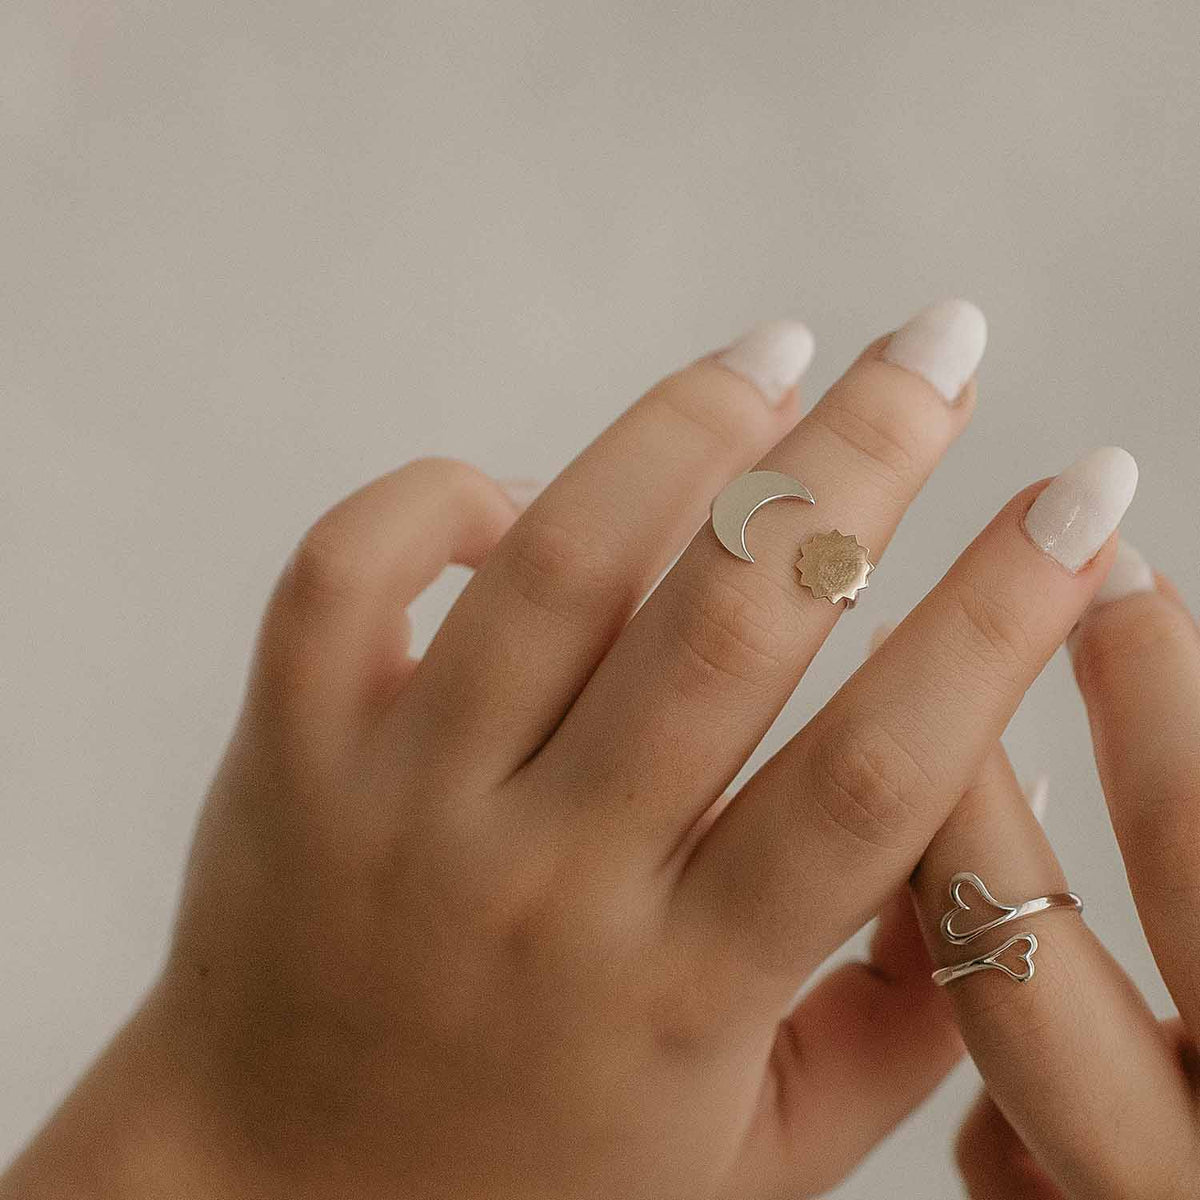 Silver and Bronze Moon Adjustable Ring - Love It Personalized